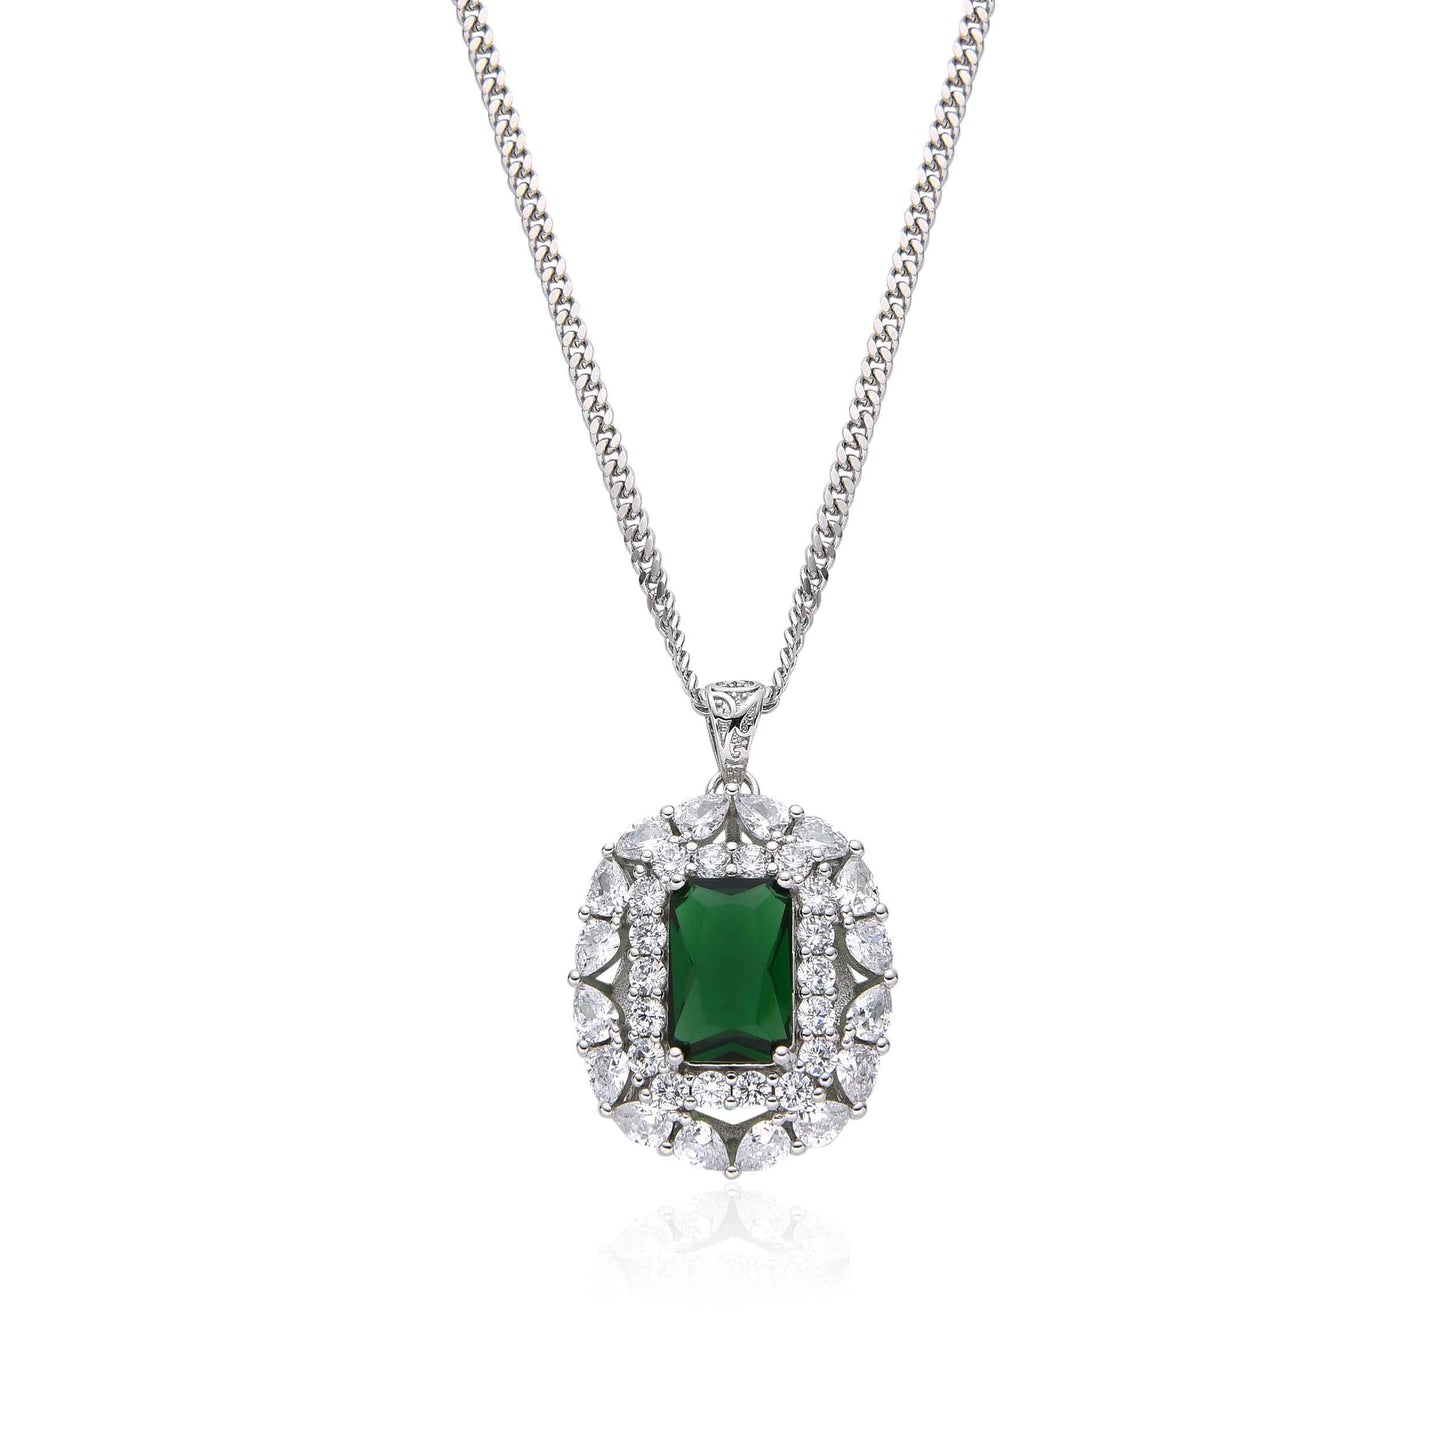 Rhodium Necklace with Emerald Green Pendant